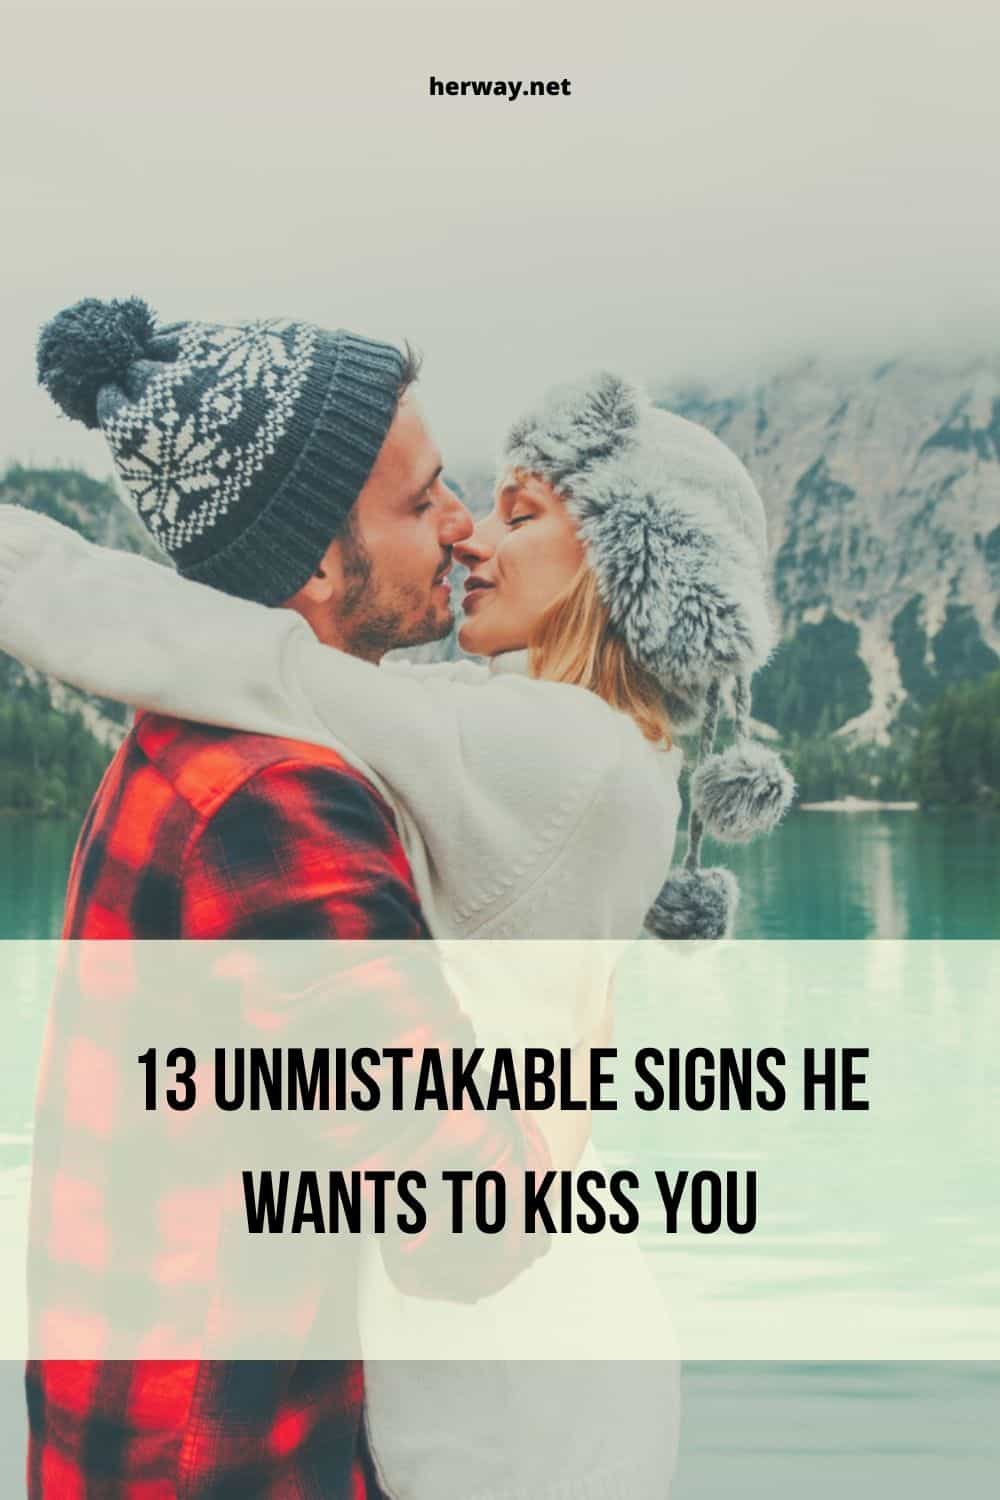 13 Unmistakable Signs He Wants To Kiss You